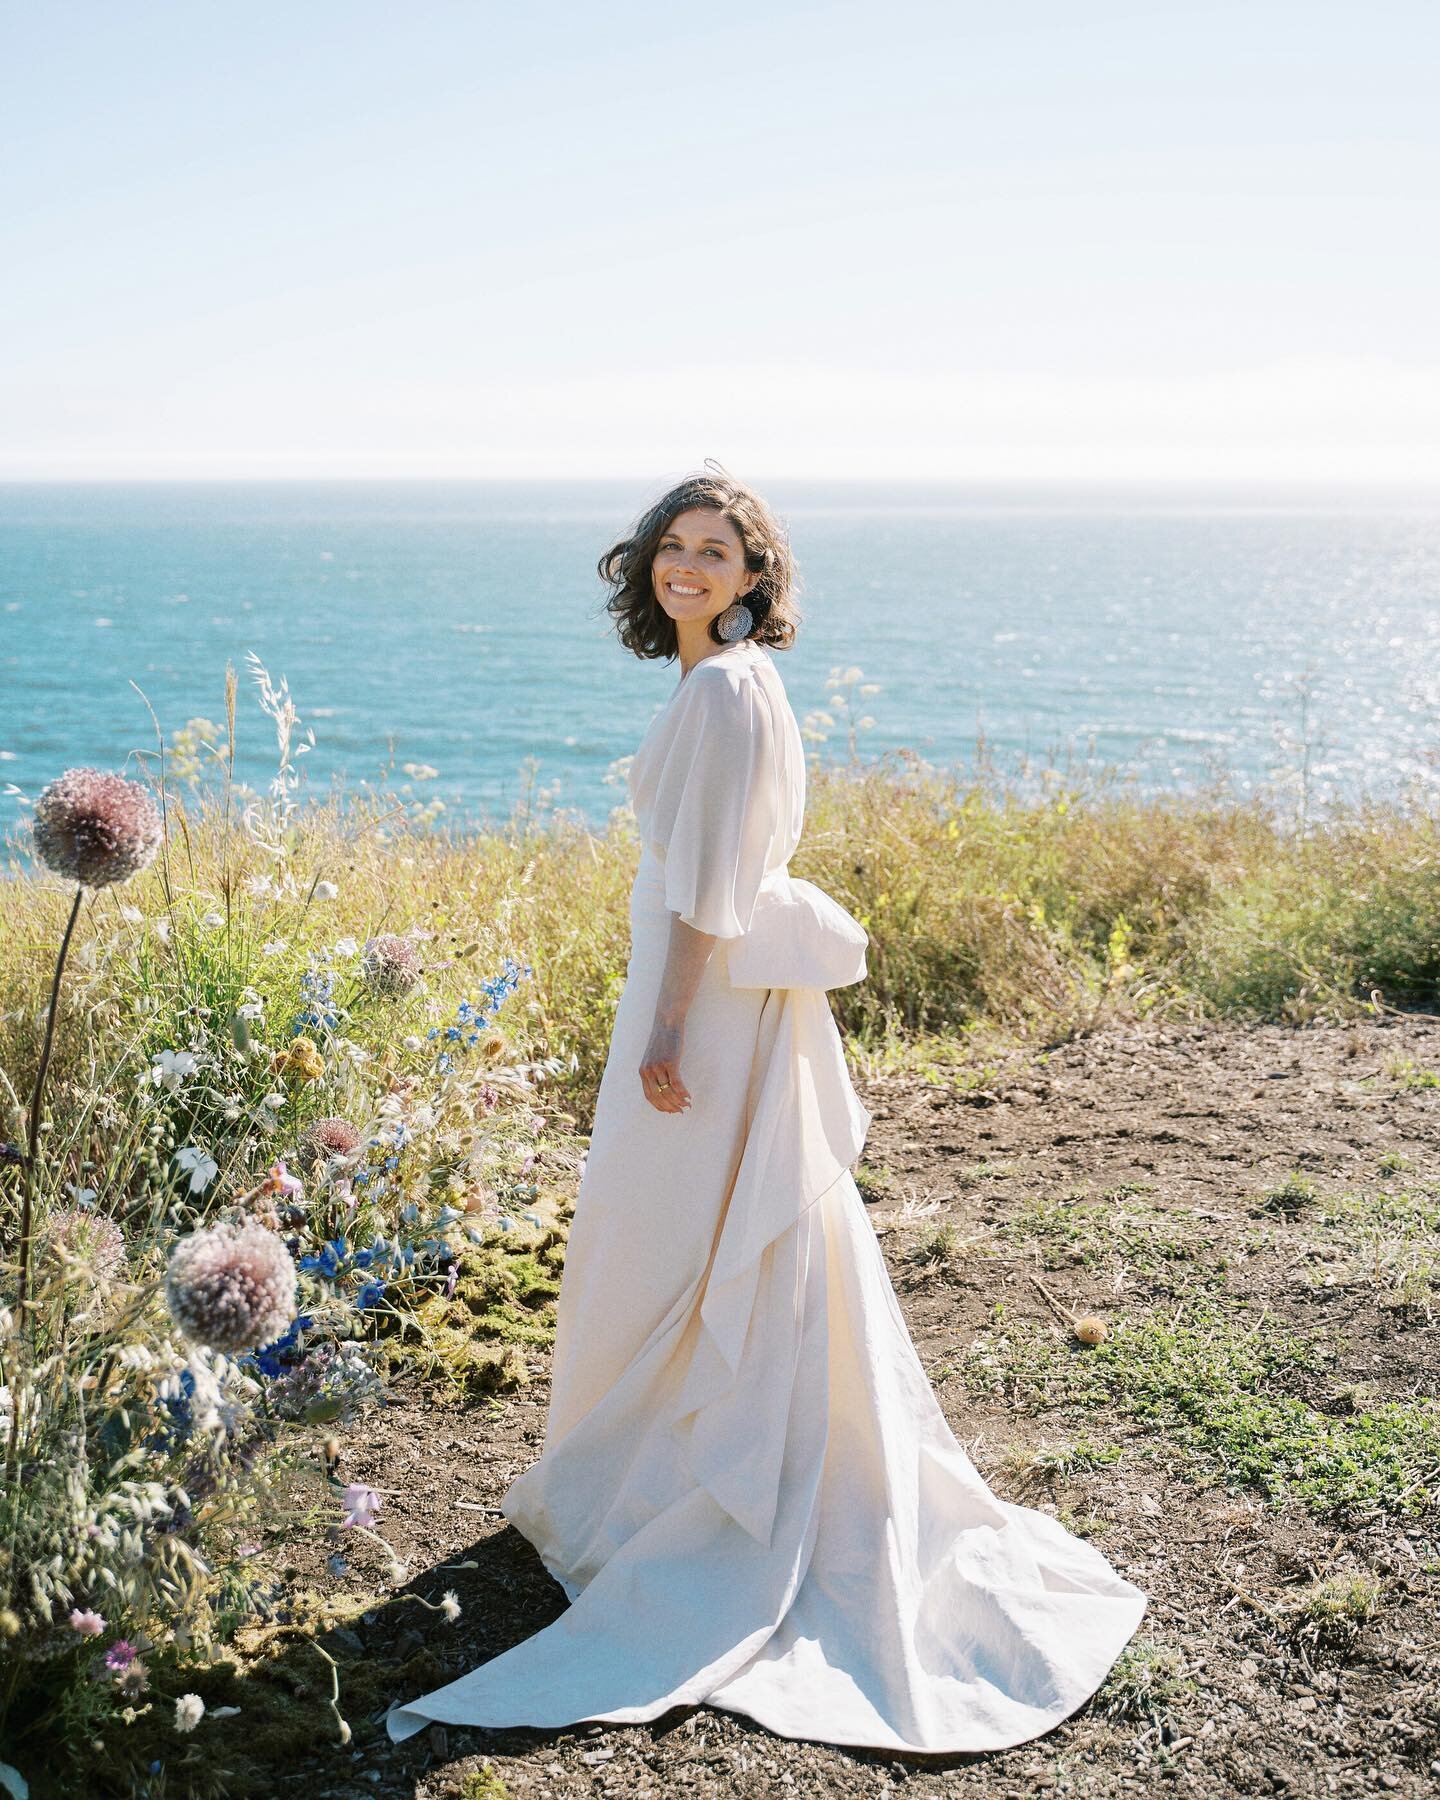 Channeling more weddings with the California coastline 🌊
Flowering for M+N with planning by @andrialeighevents @jessica_andrialeigh was a dream with the floral style I gravitate the most towards. You were just the sweetest and so easy to work with.
